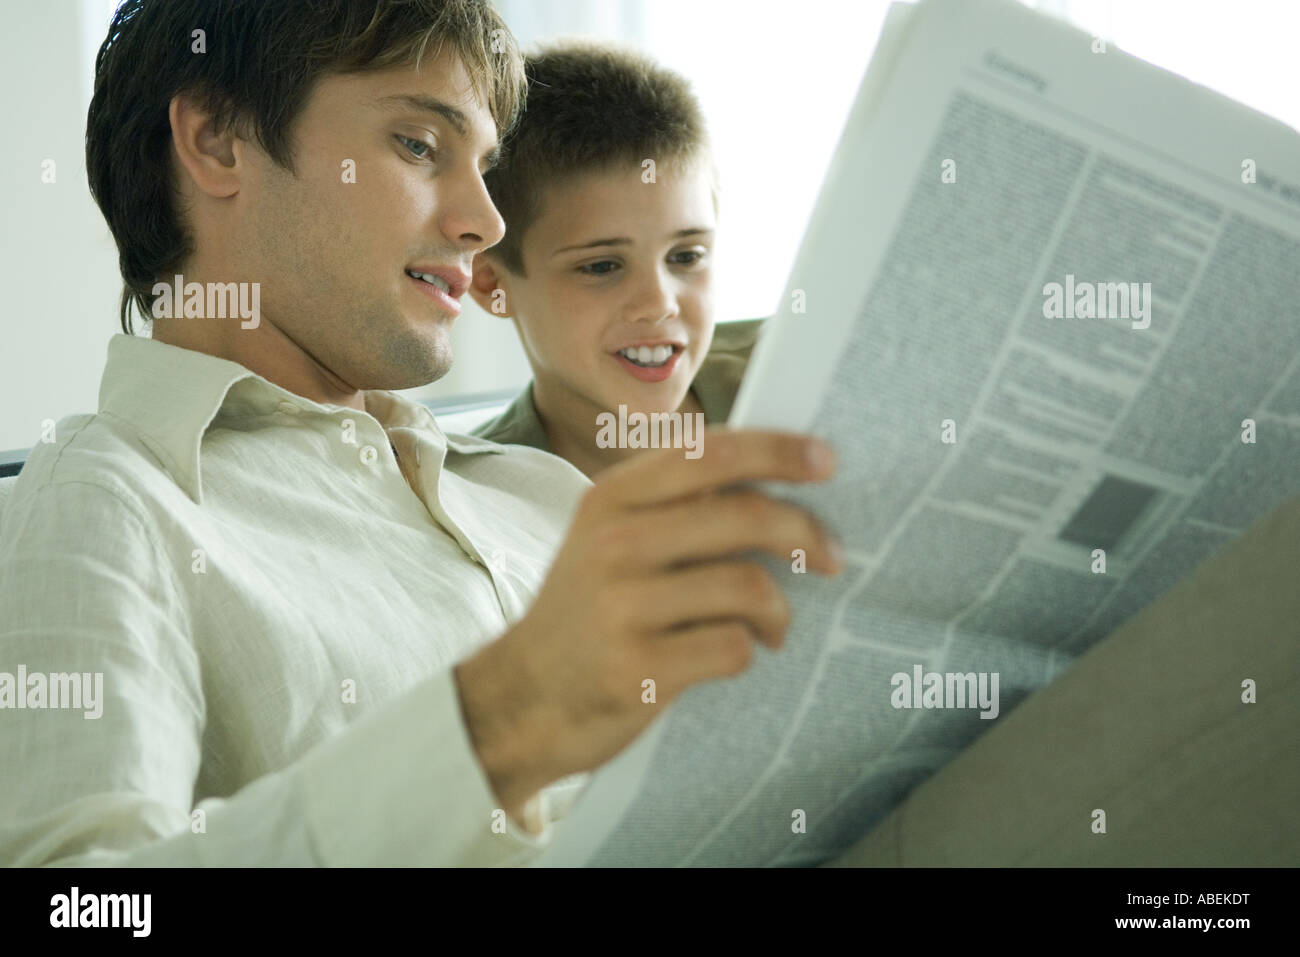 Father and son reading newspaper together Stock Photo